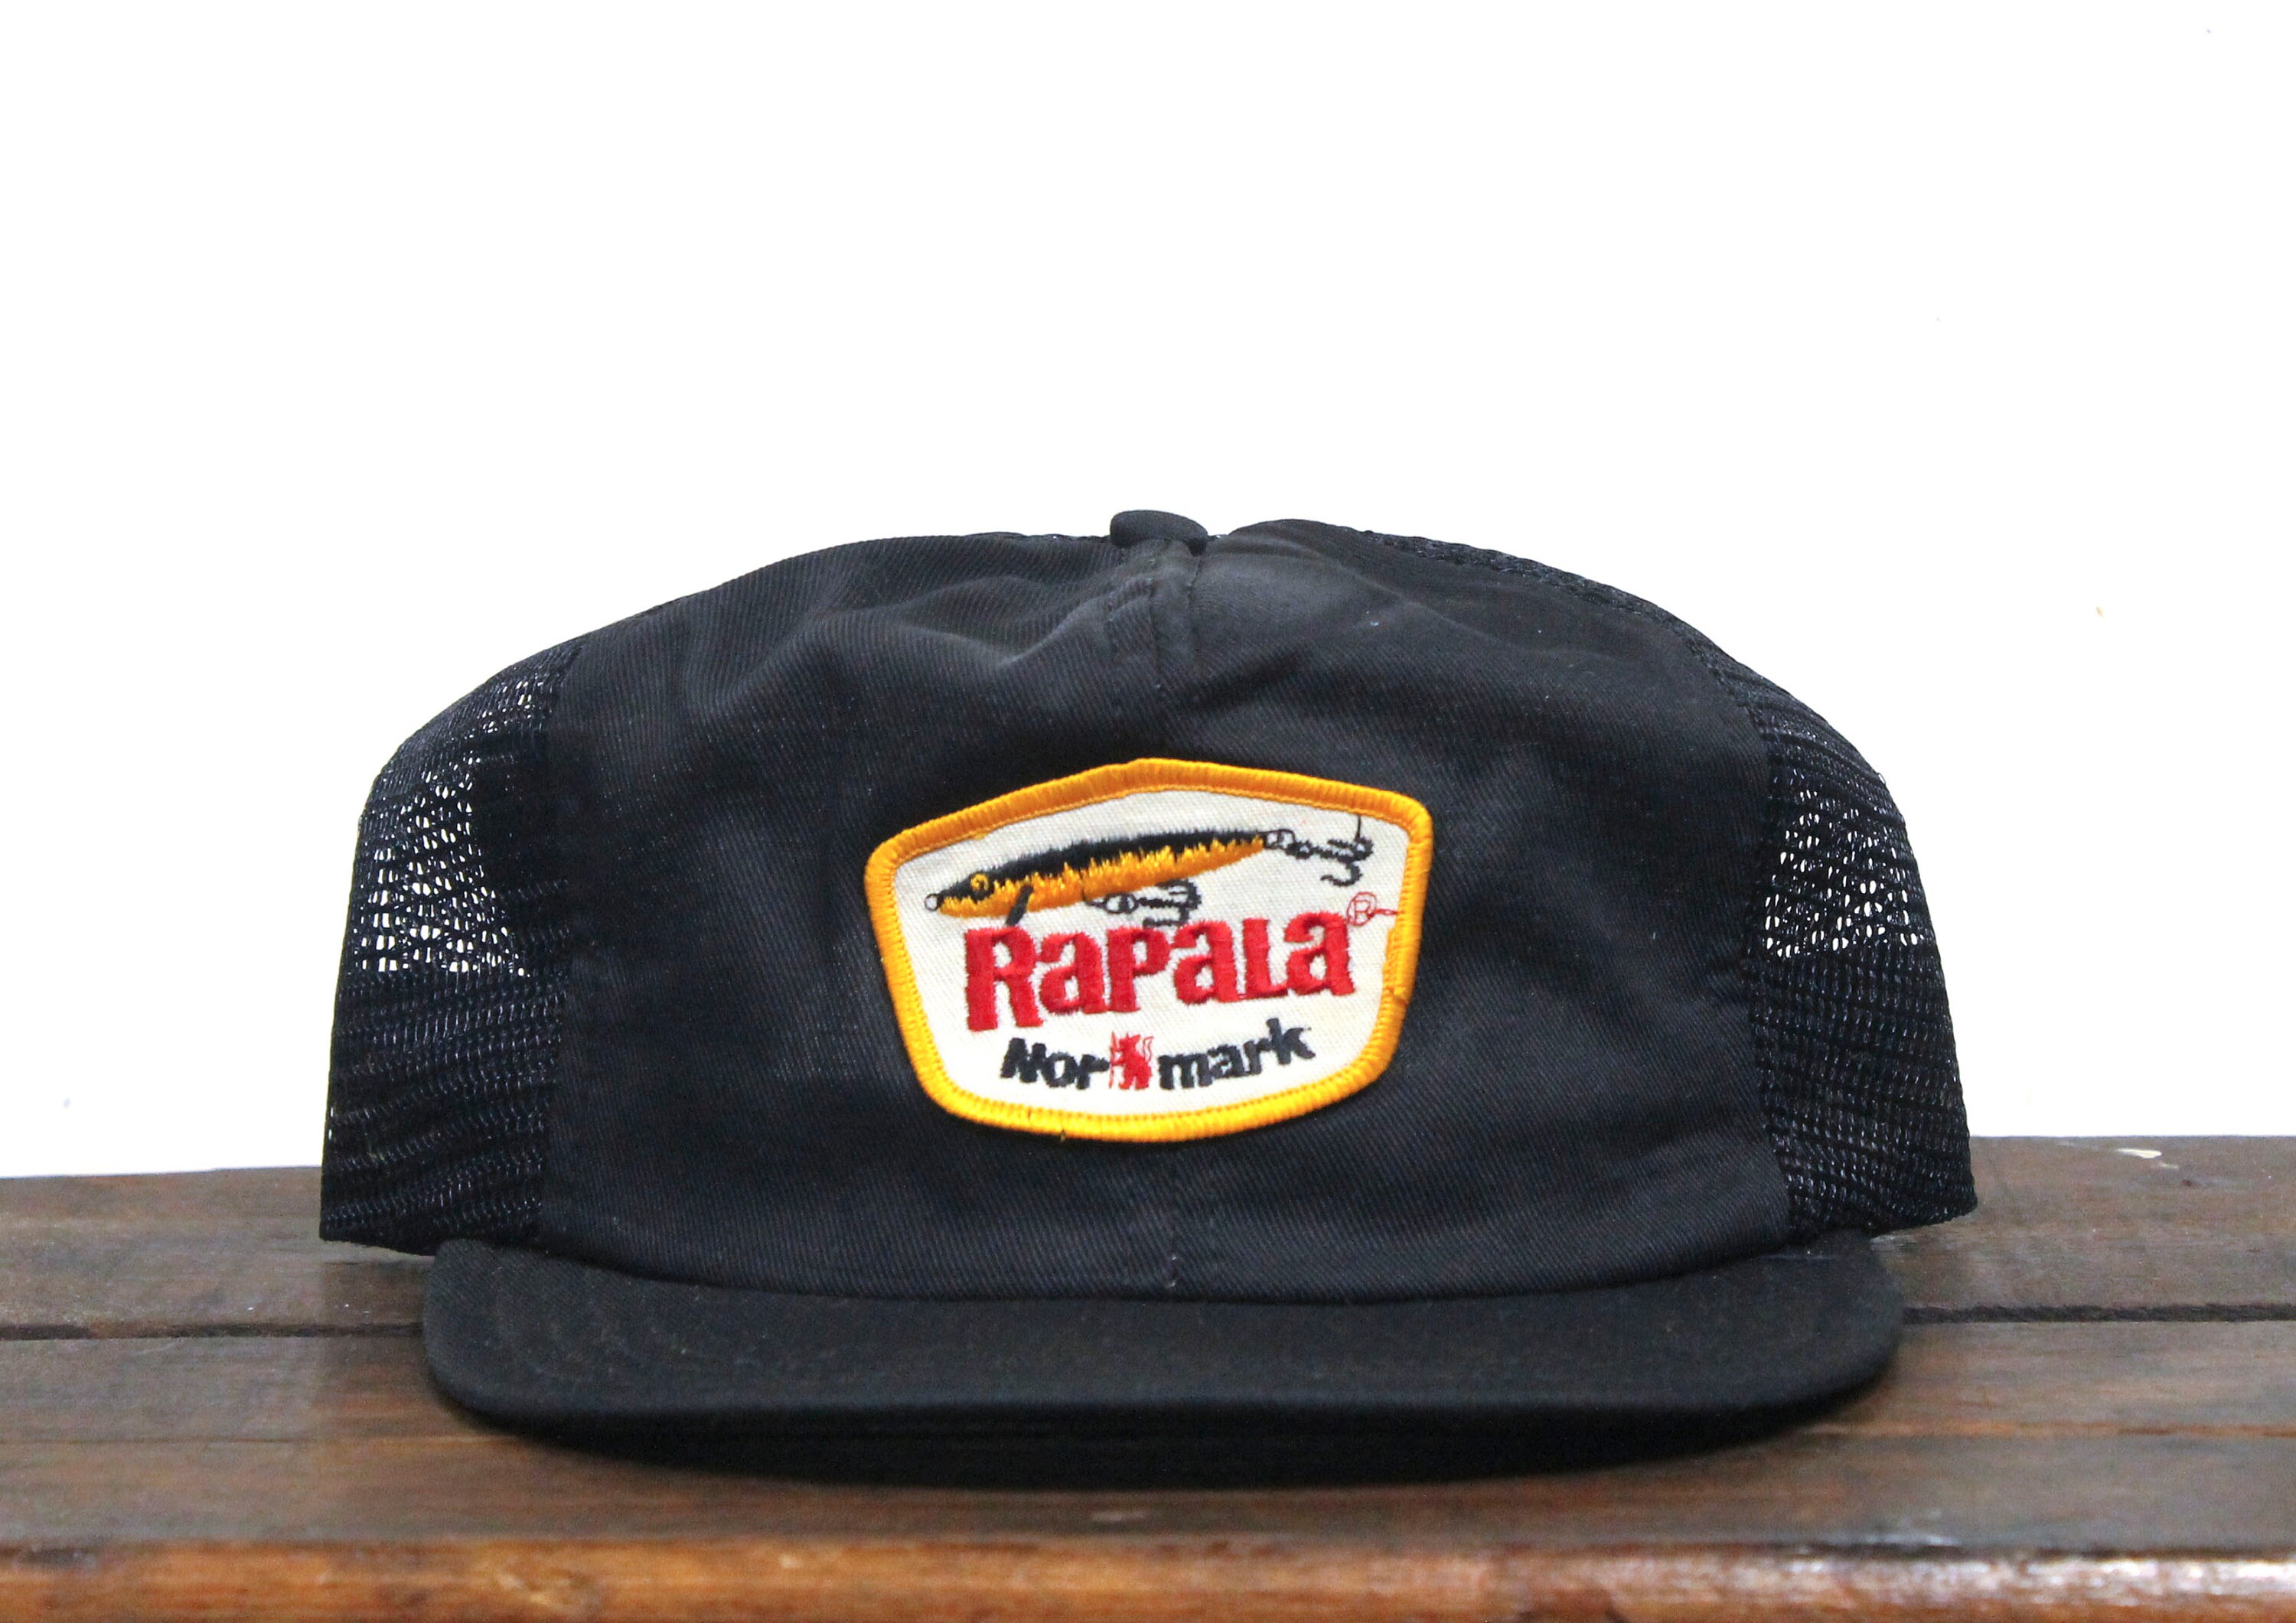 Vintage 80s Rapala nor Mark Fishing Lures Fisherman Supplies Angler Snapback  Trucker Hat Baseball Cap Patch Made in USA -  Canada